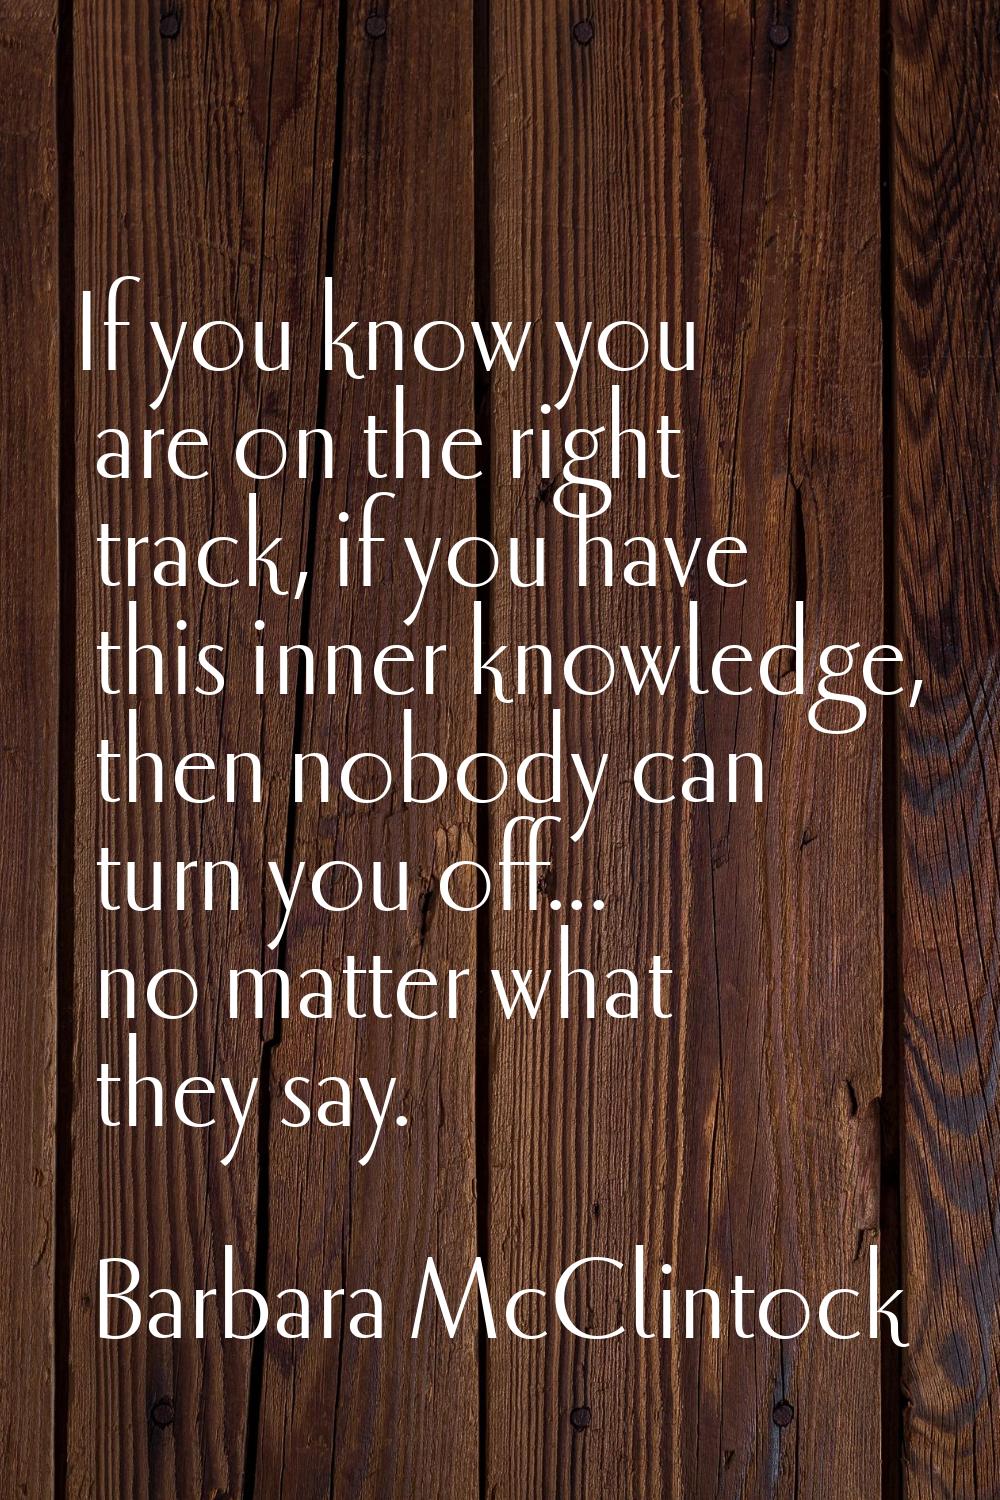 If you know you are on the right track, if you have this inner knowledge, then nobody can turn you 